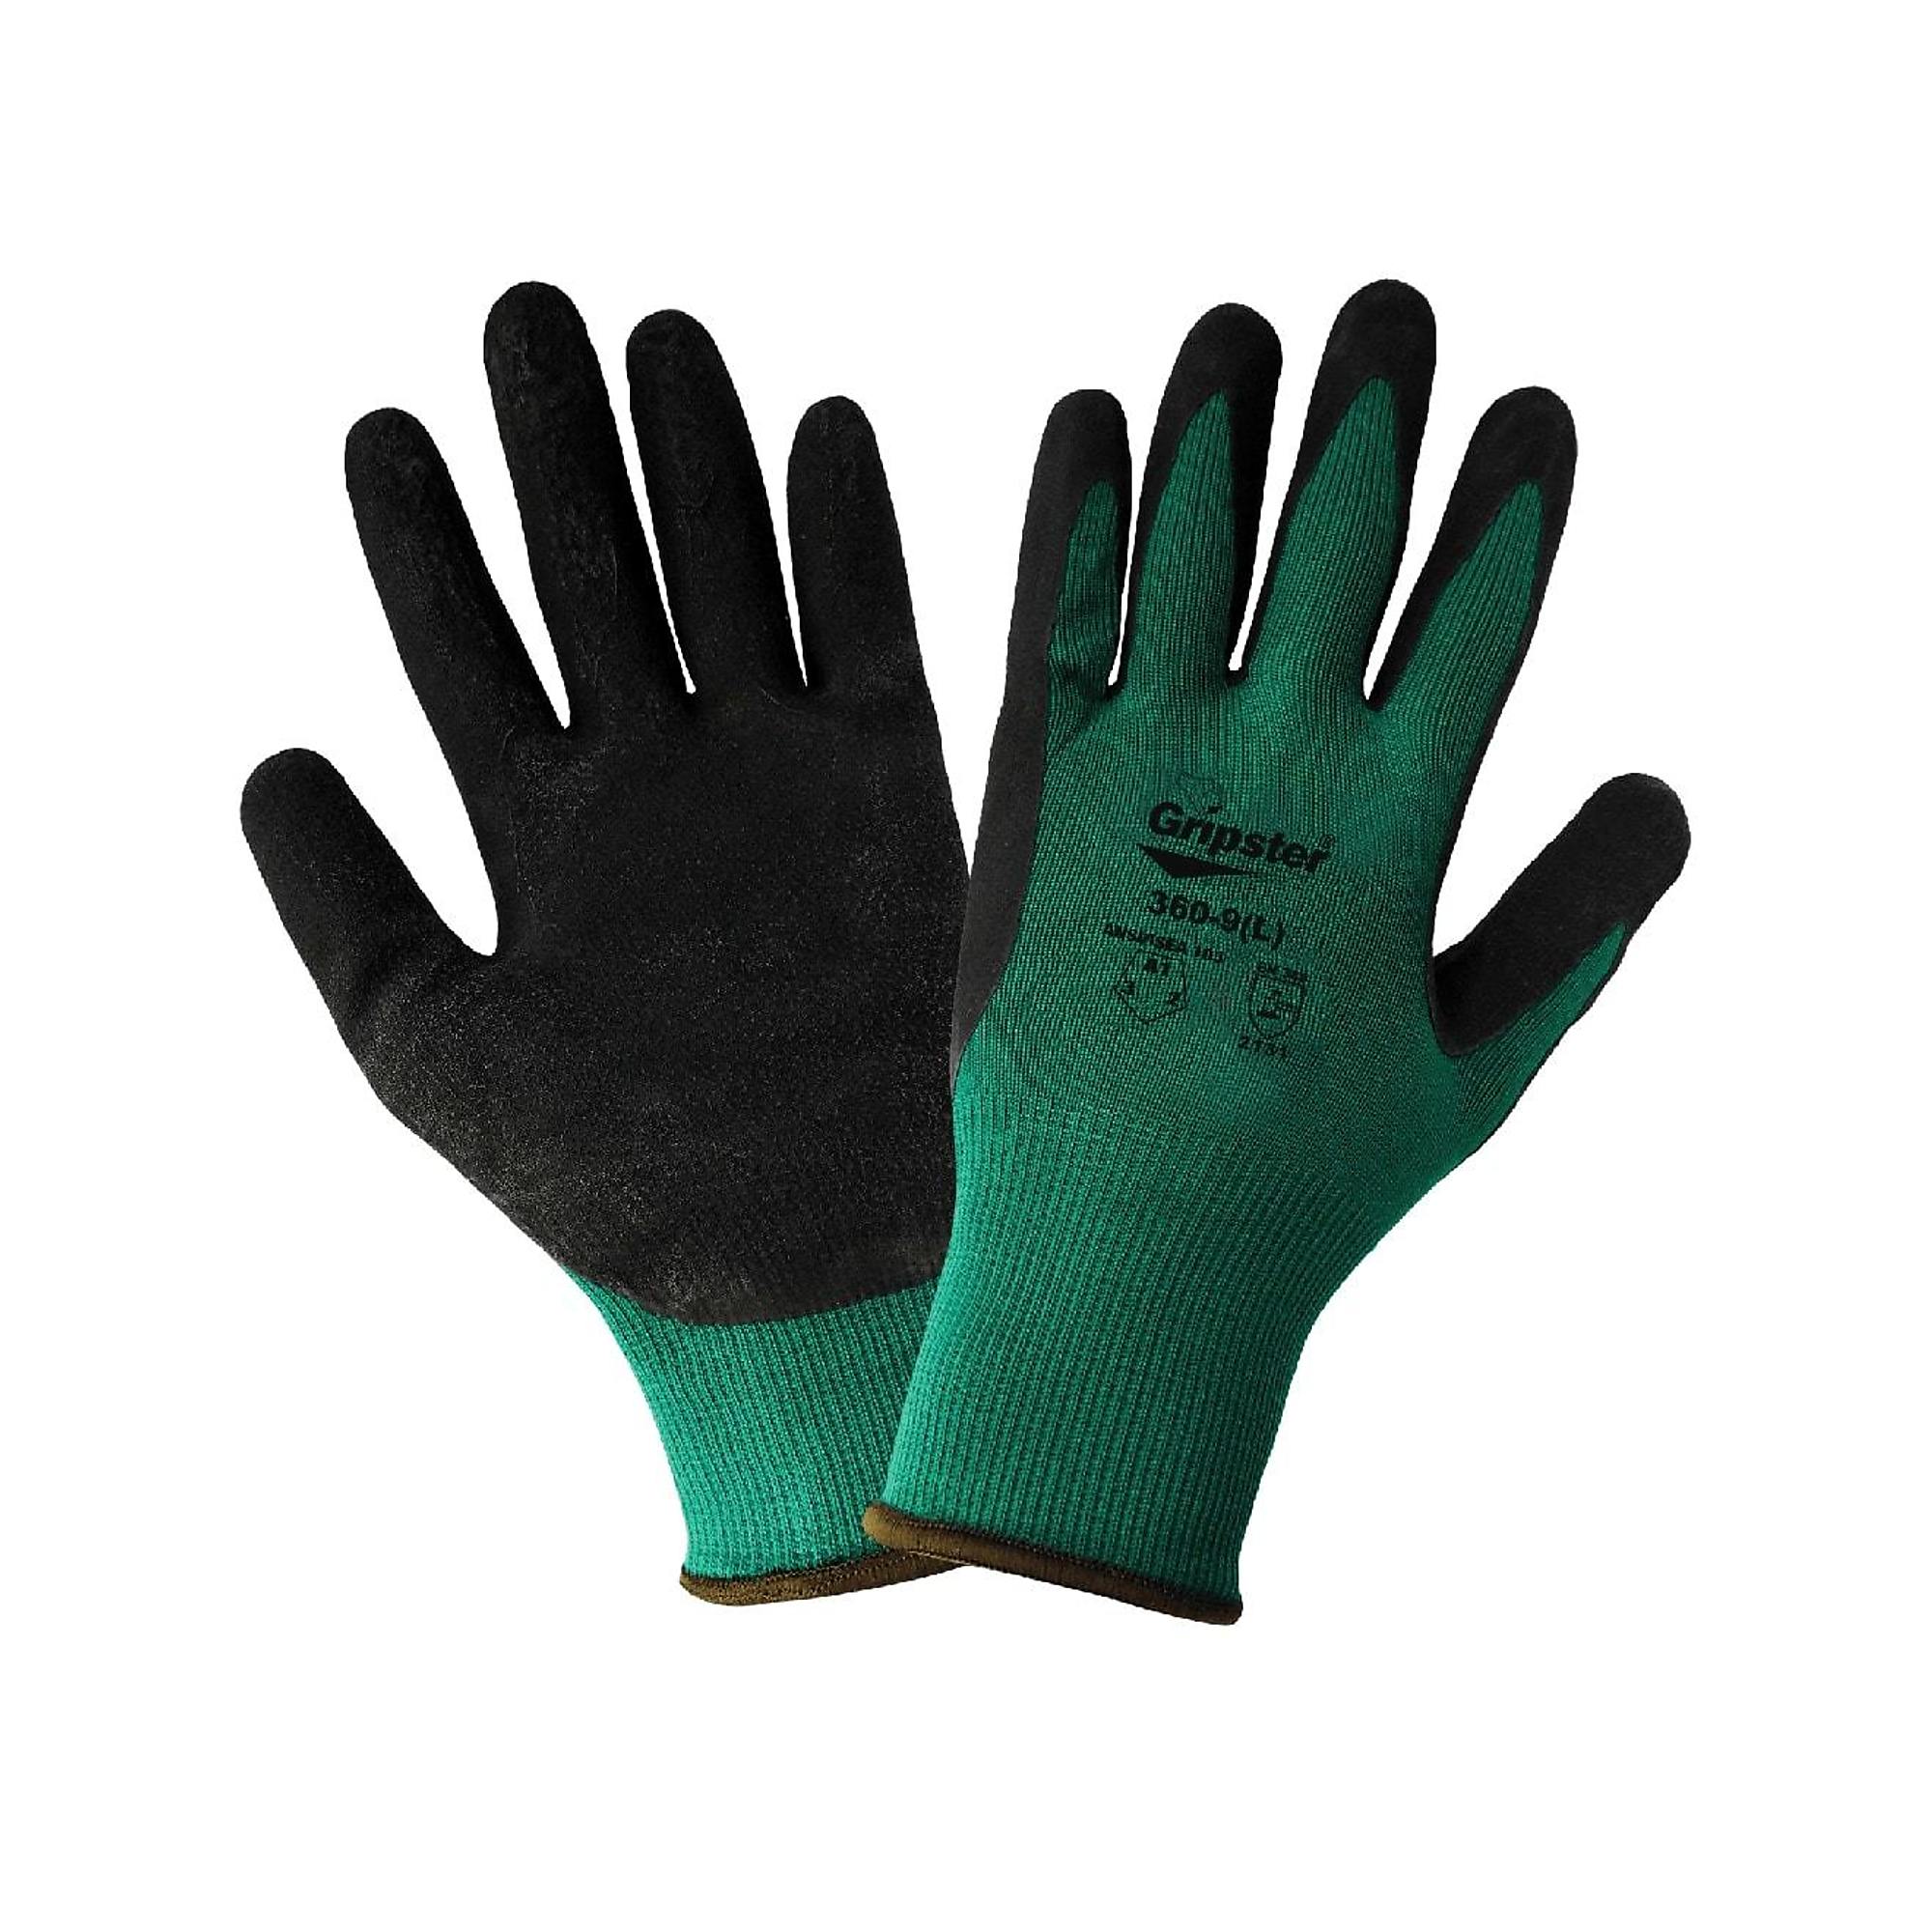 Global Glove Gripster , Green, Black Rub Coated, Cut Resistant A1 Gloves - 12 Pairs, Size XL, Color Green/Black, Included (qty.) 12 Model 360-10(XL)